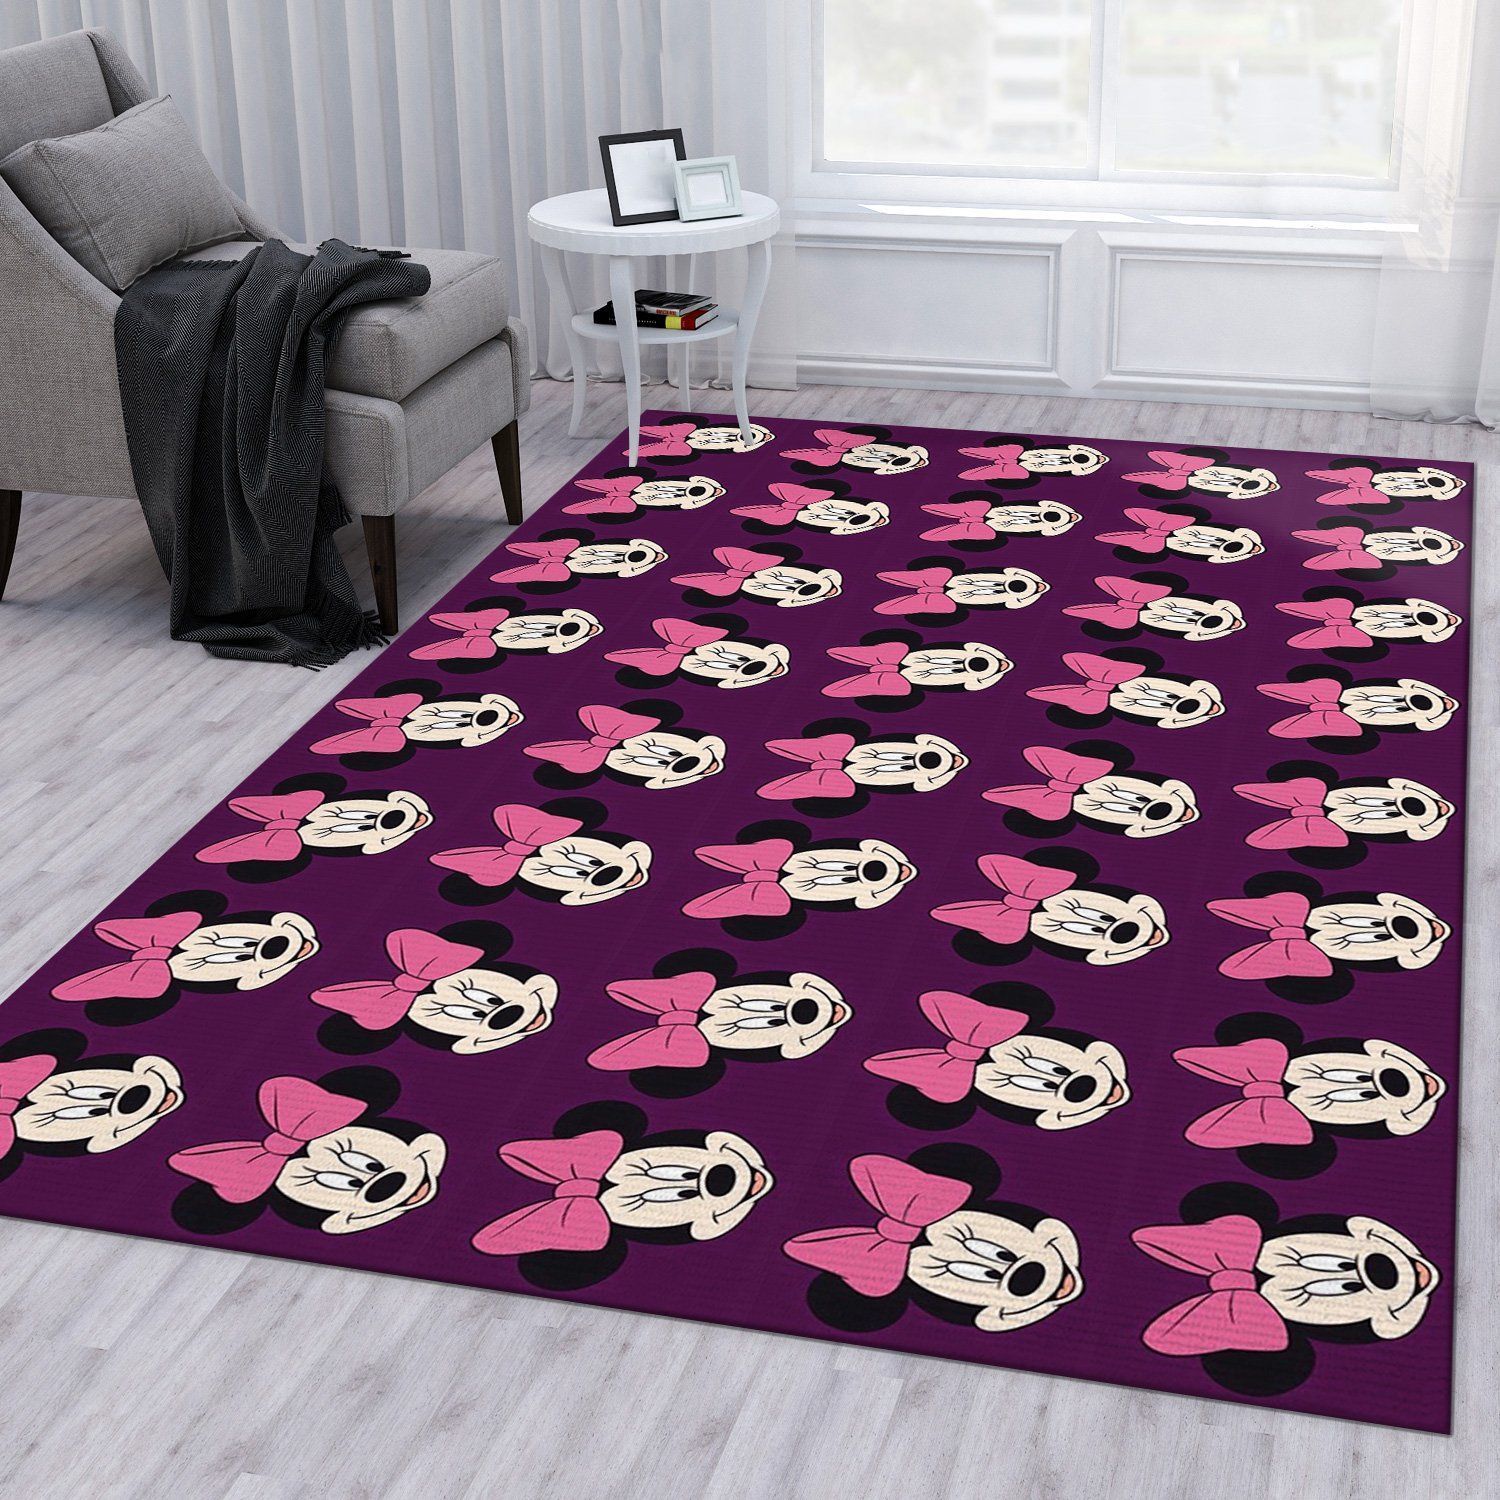 Minnie Mouse Ver5 Area Rug Living Room Rug US Gift Decor - Indoor Outdoor Rugs